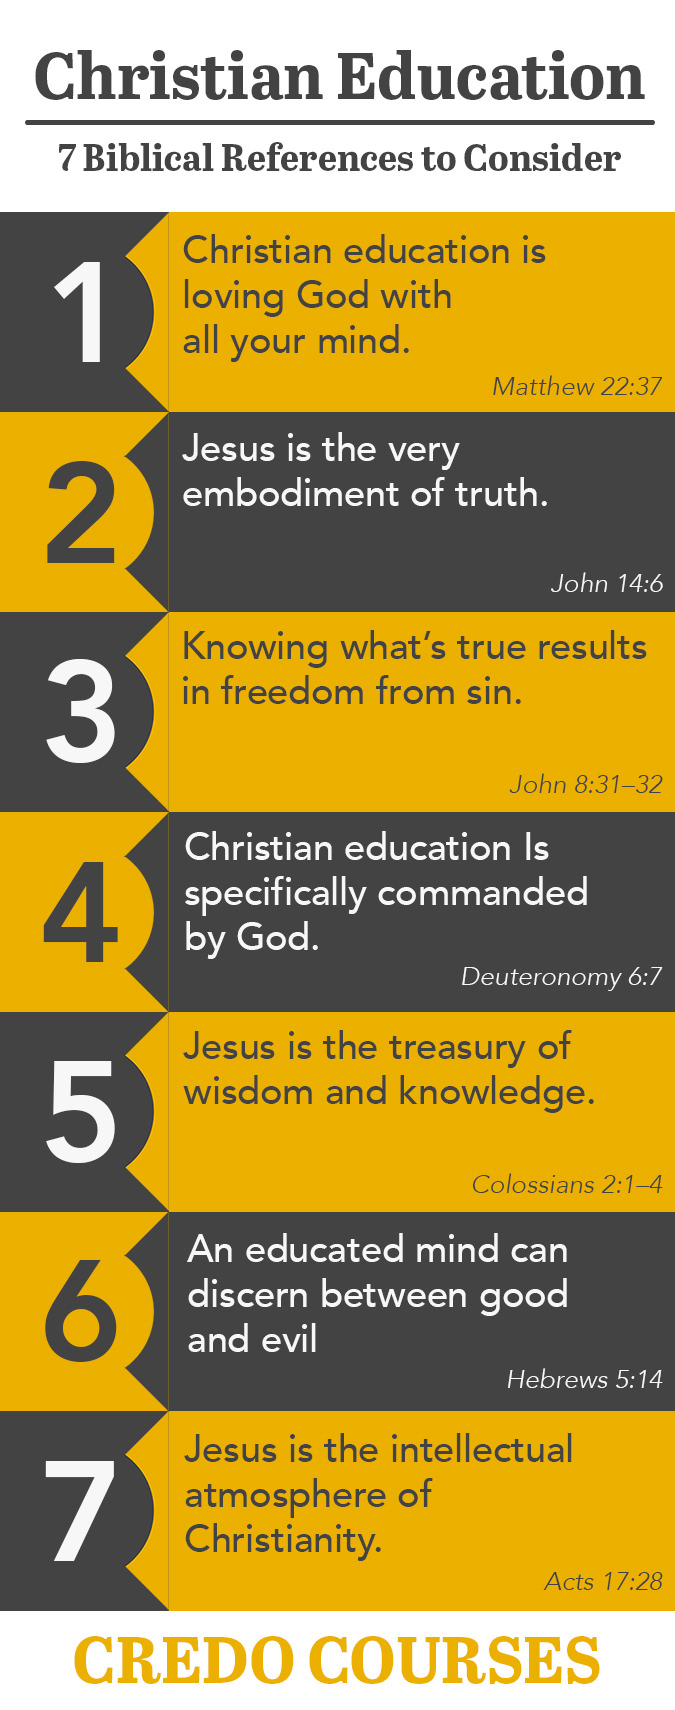 Christian Education: 7 Biblical References to Consider (Infographic)